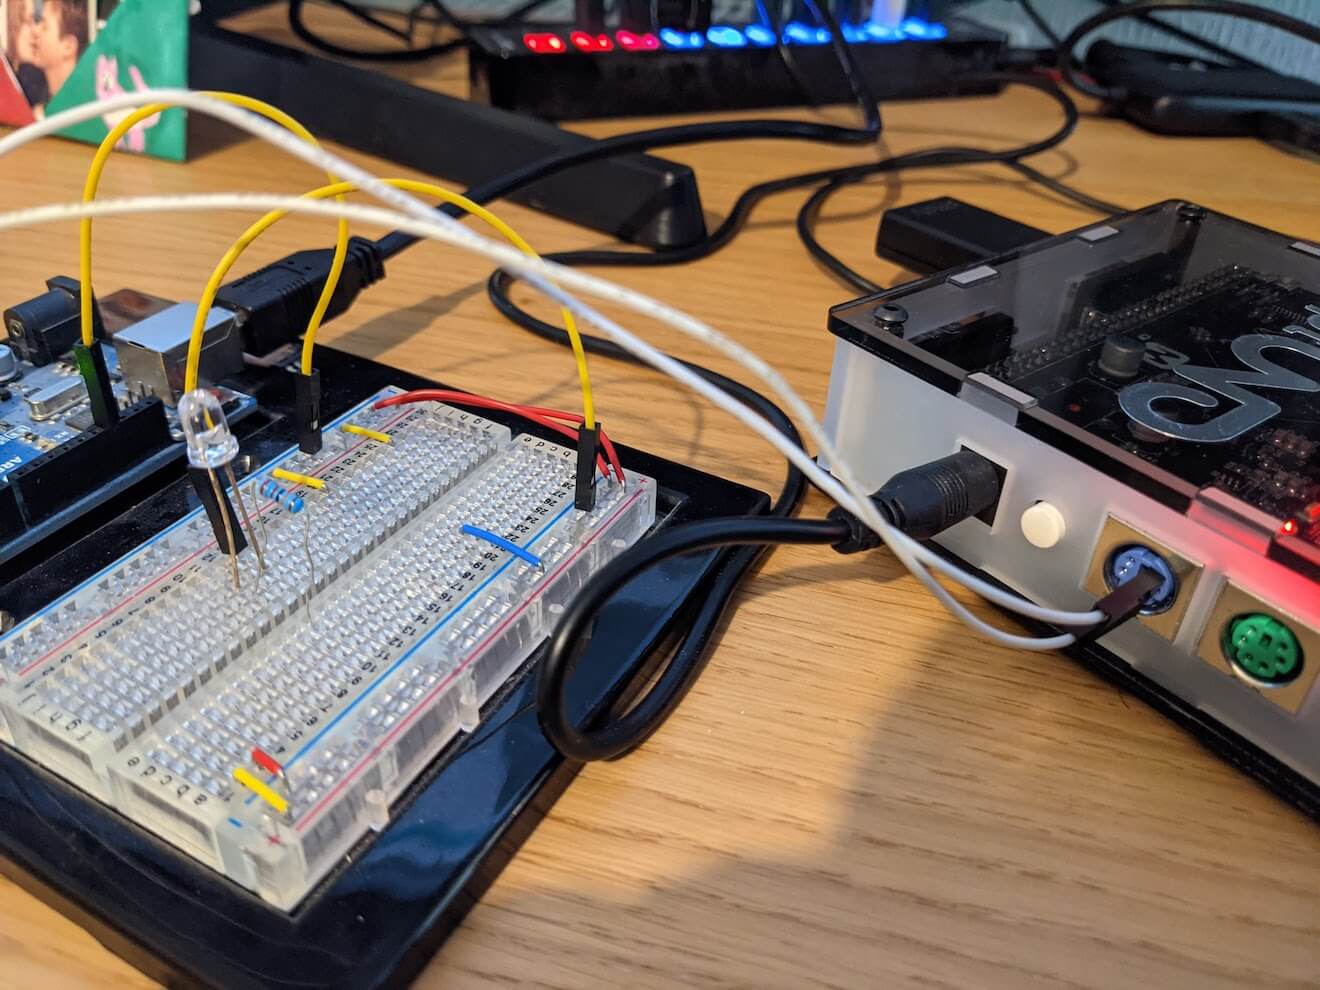 An arduino wired directly into PS/2 ports